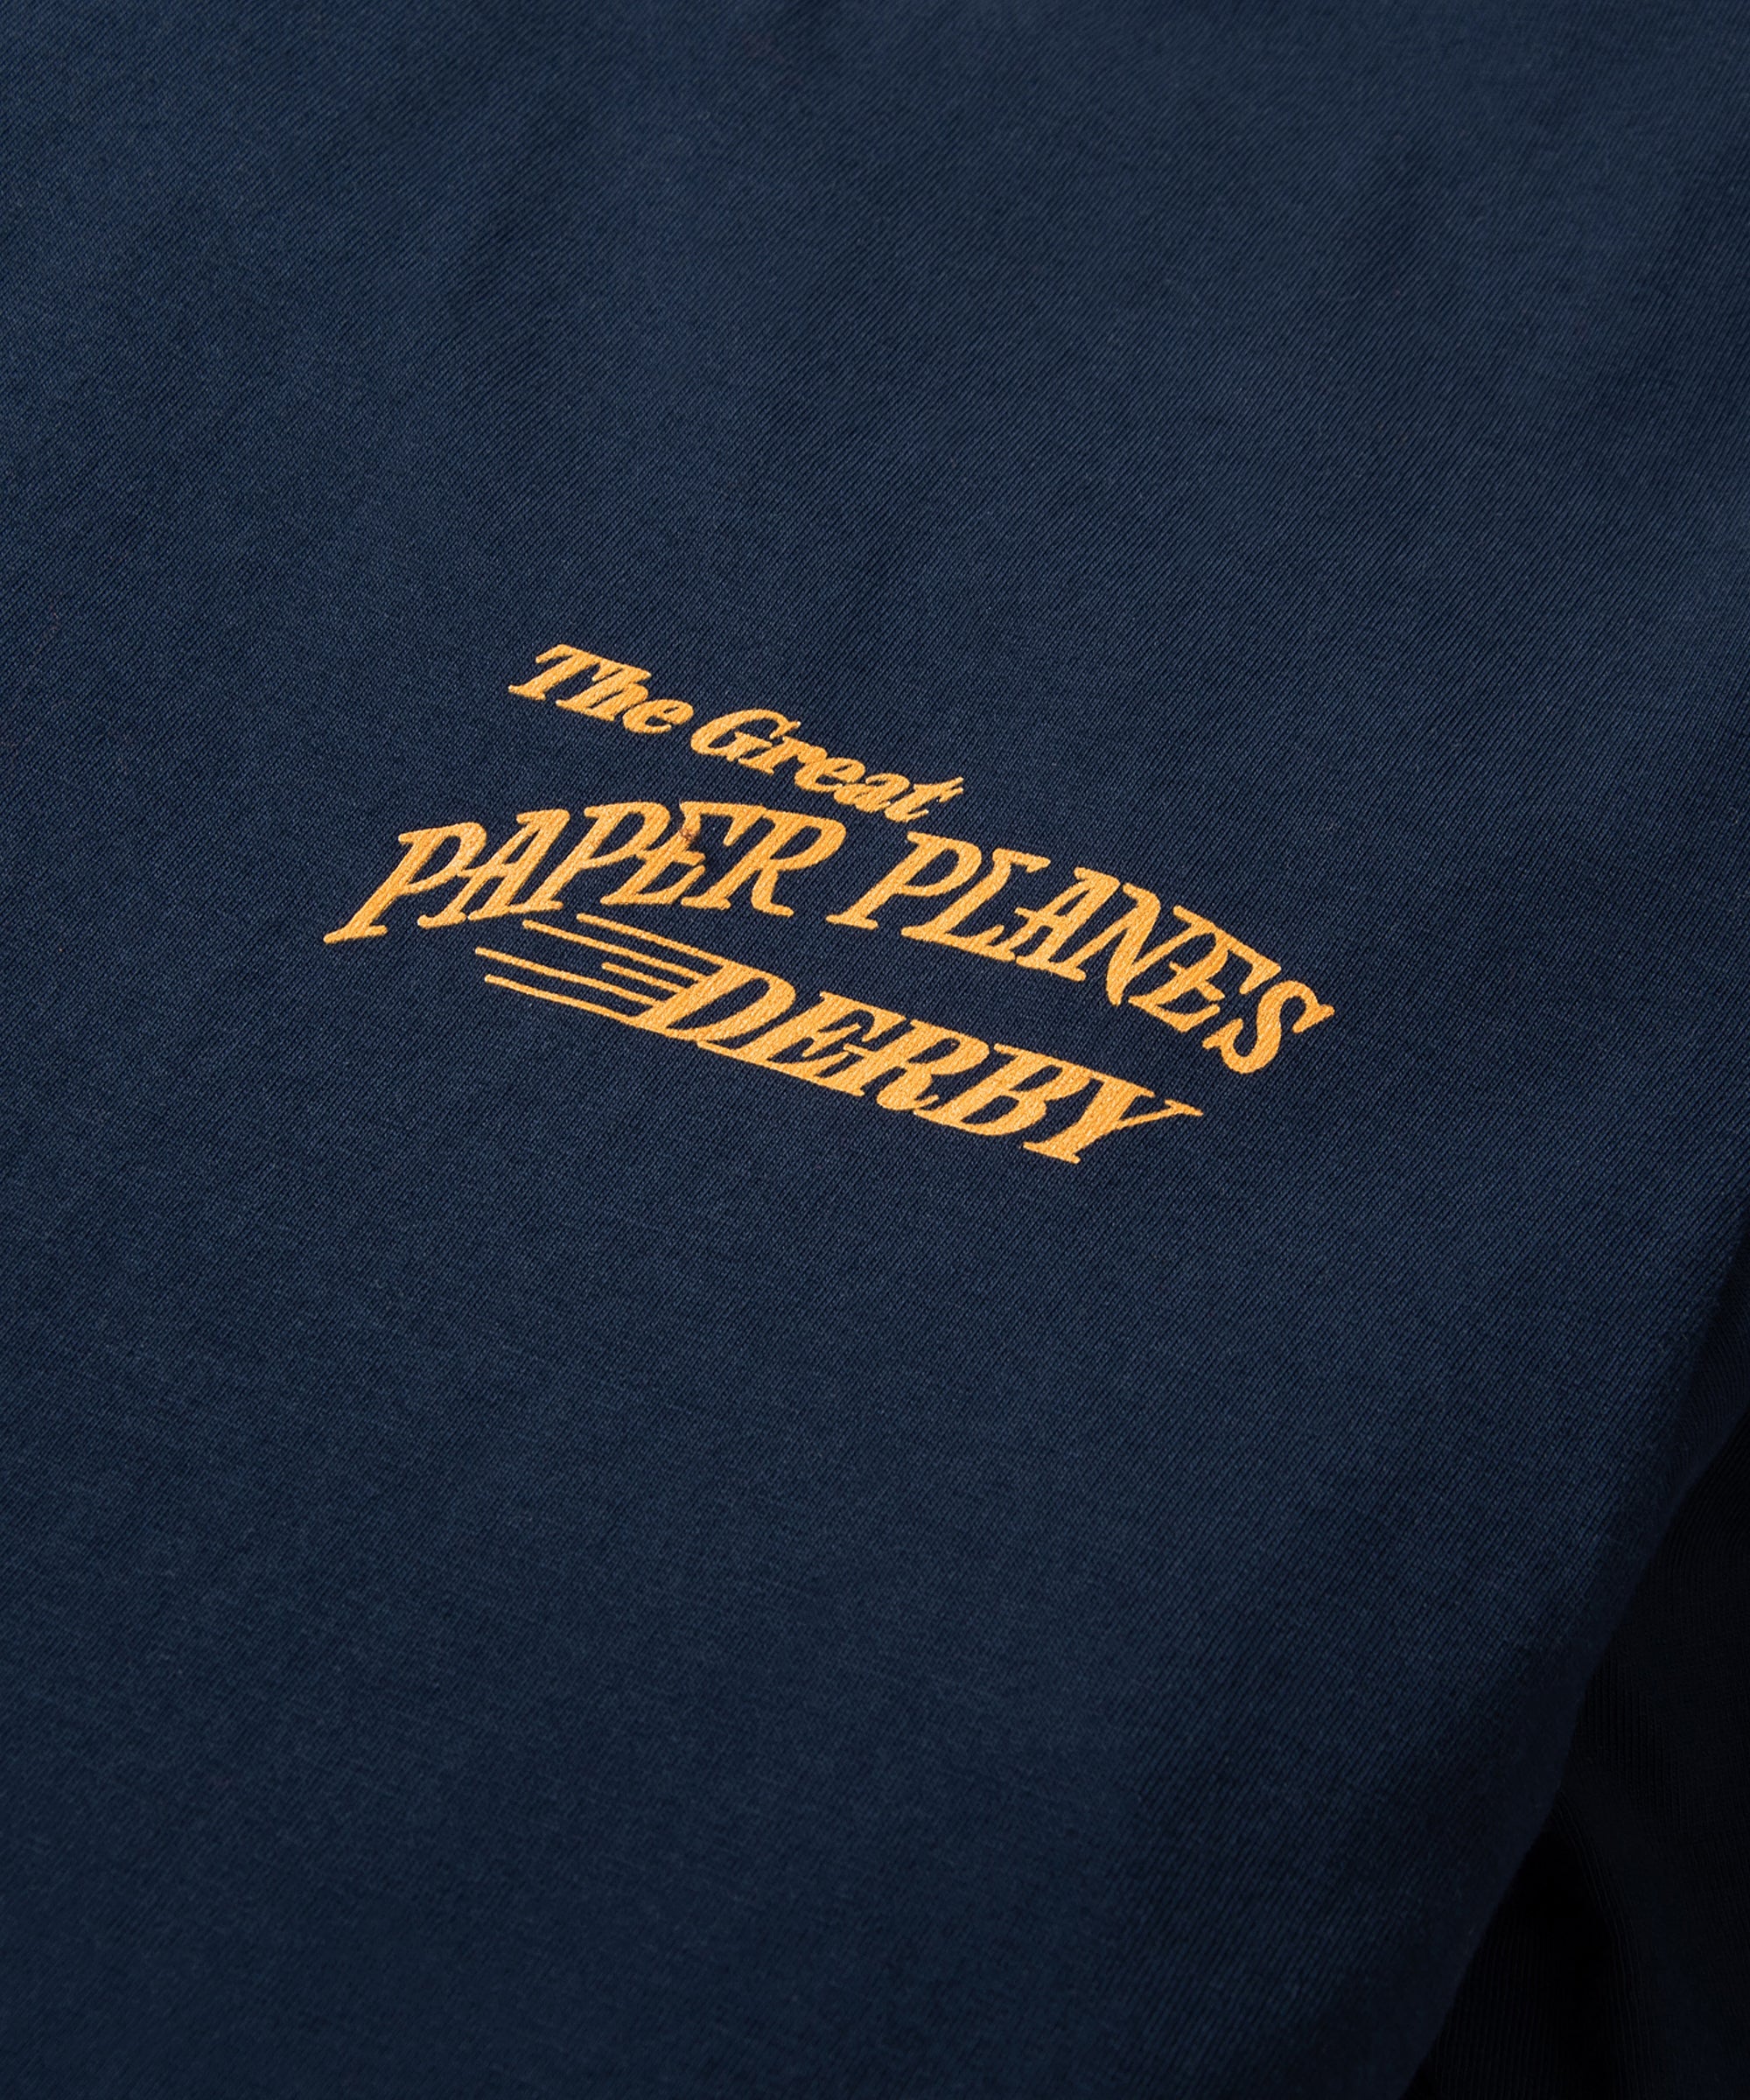 Paper Planes Tee Shirt - Derby Tee